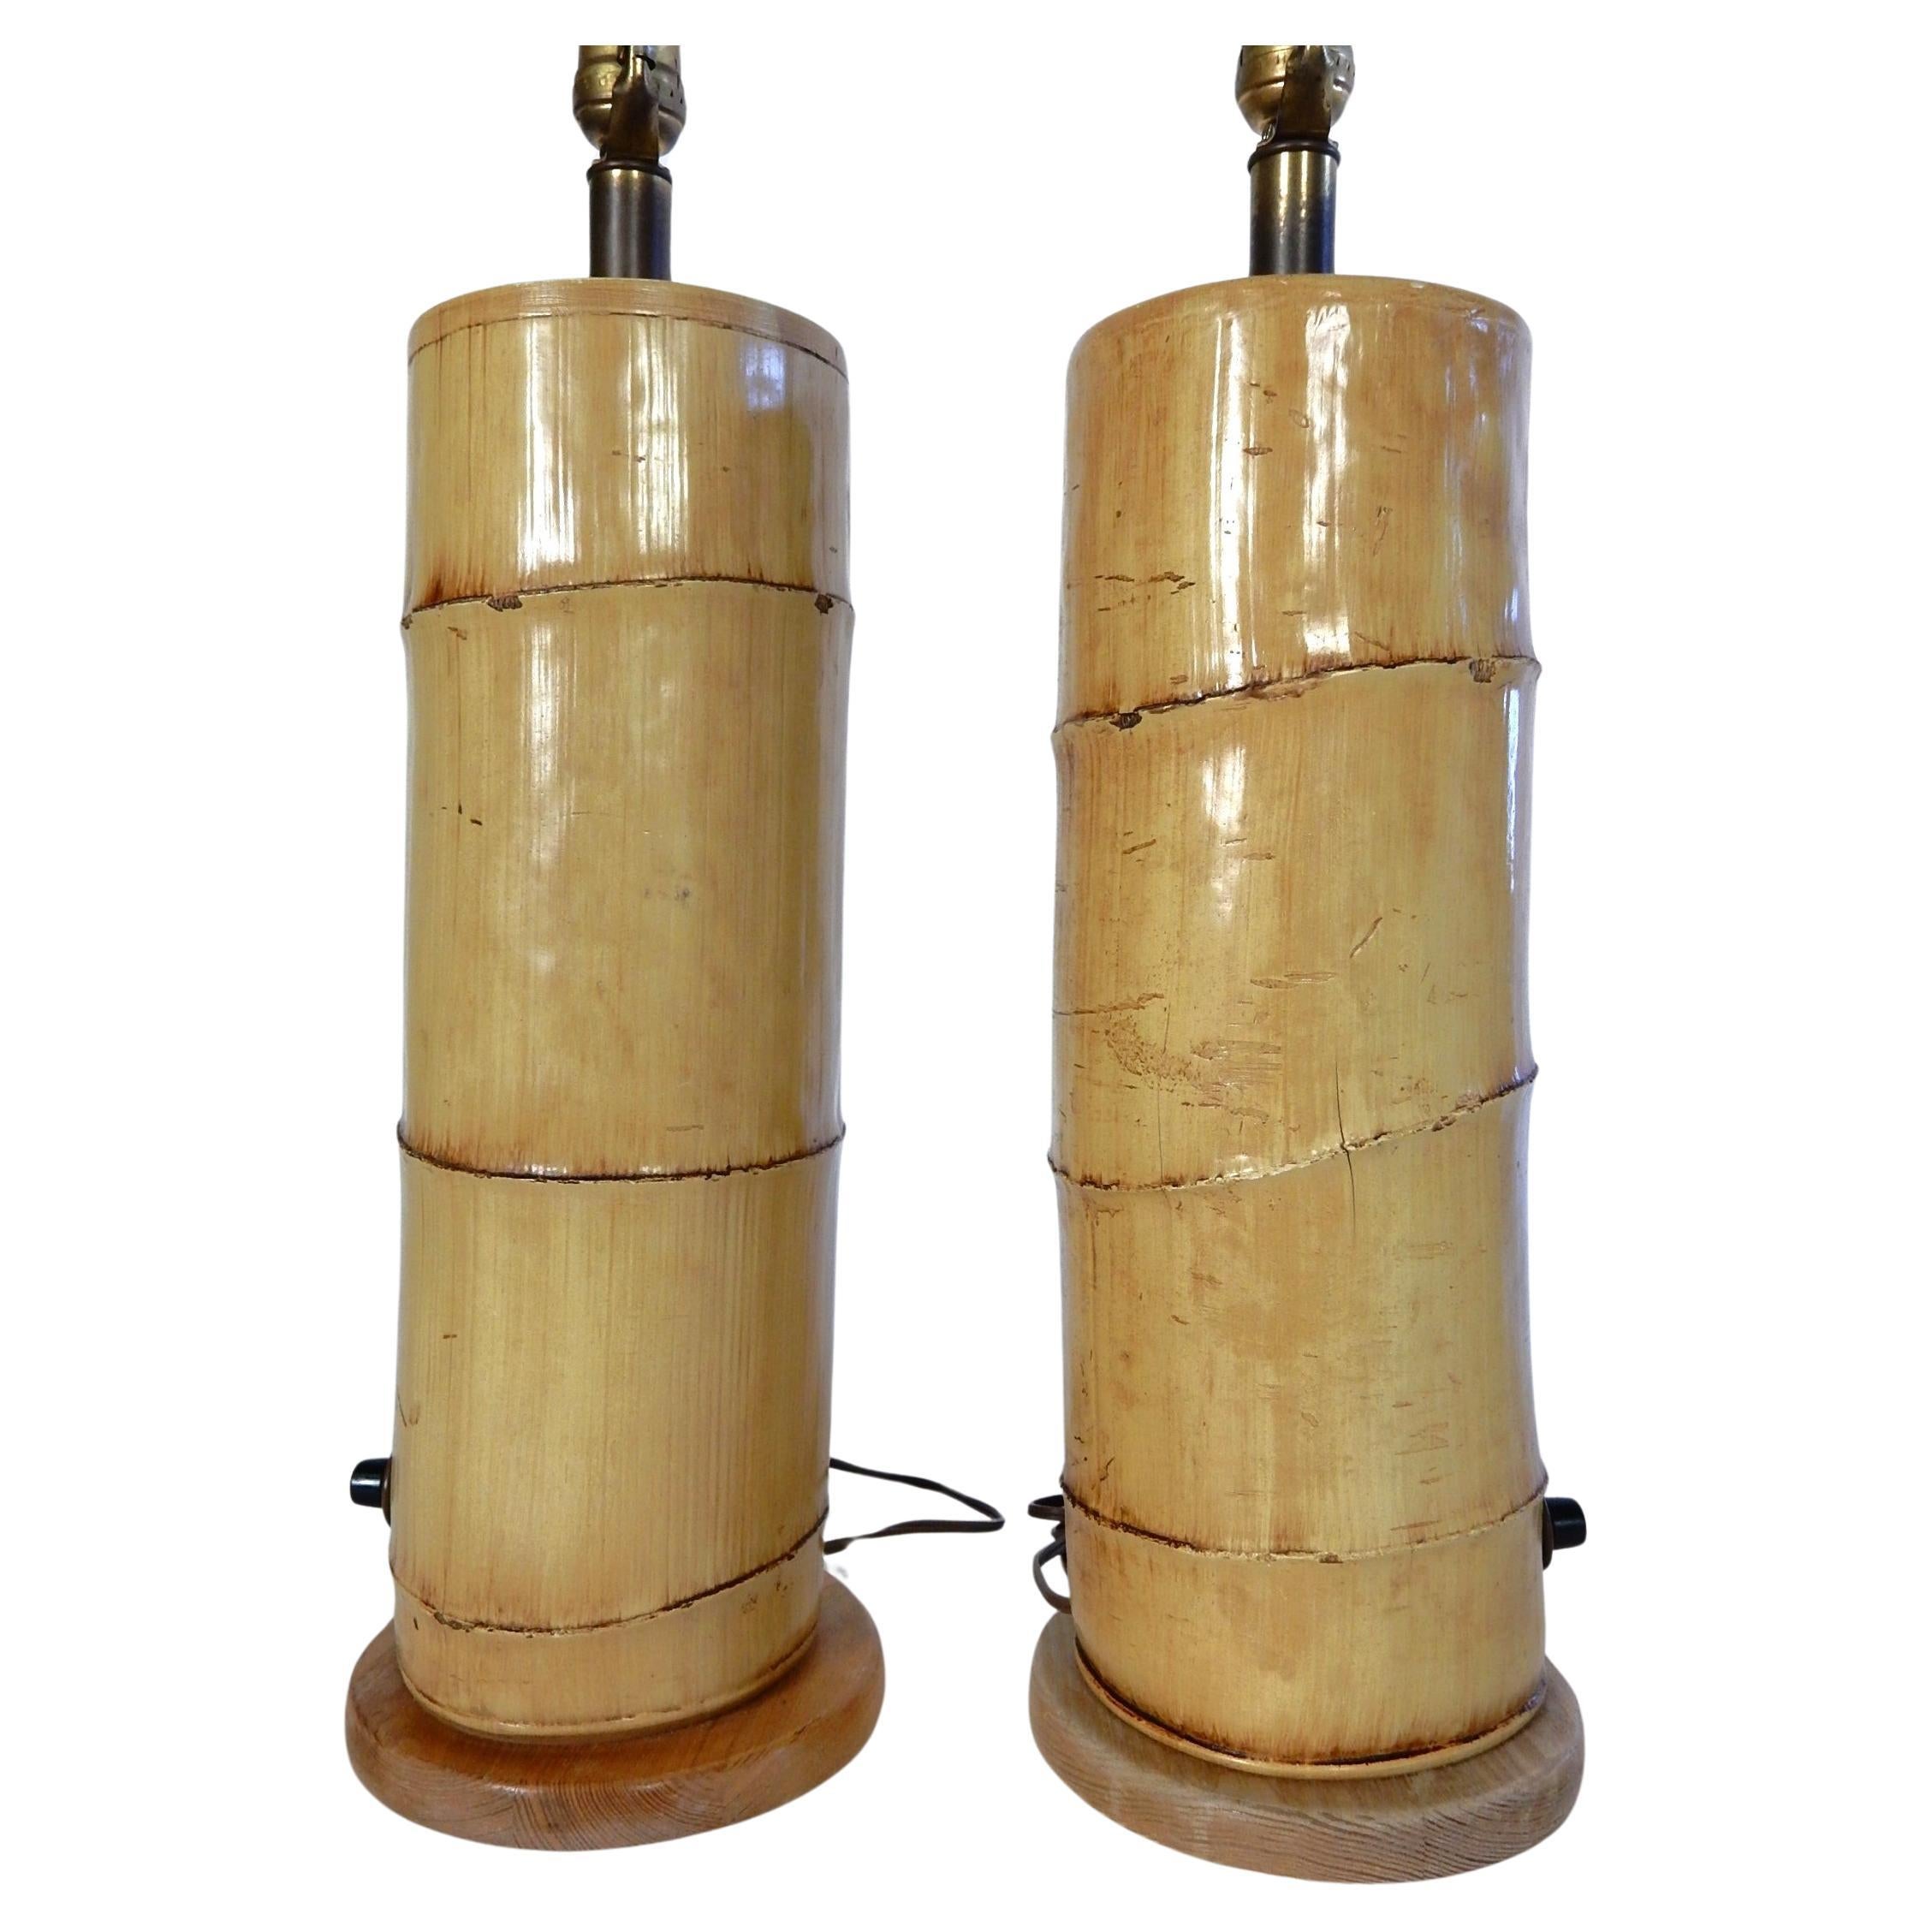 American Vintage Faux Bamboo Plaster Table Lamps from the Moana Hotel, Hawaii 1960's For Sale